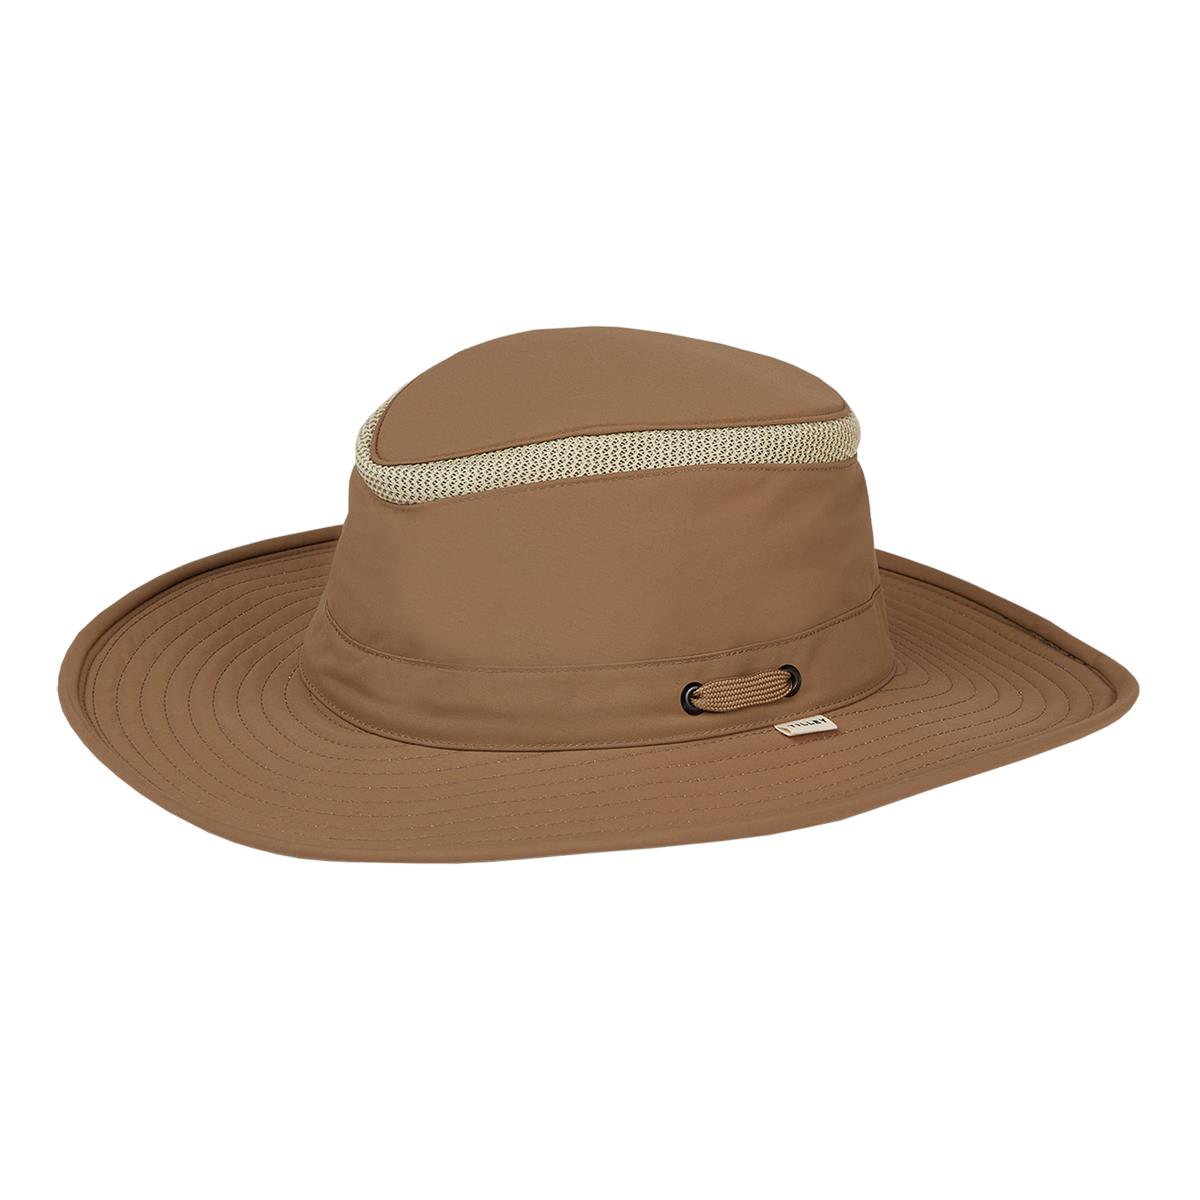 How does the Tilley Airflo Hat ensure coolness during adventures?